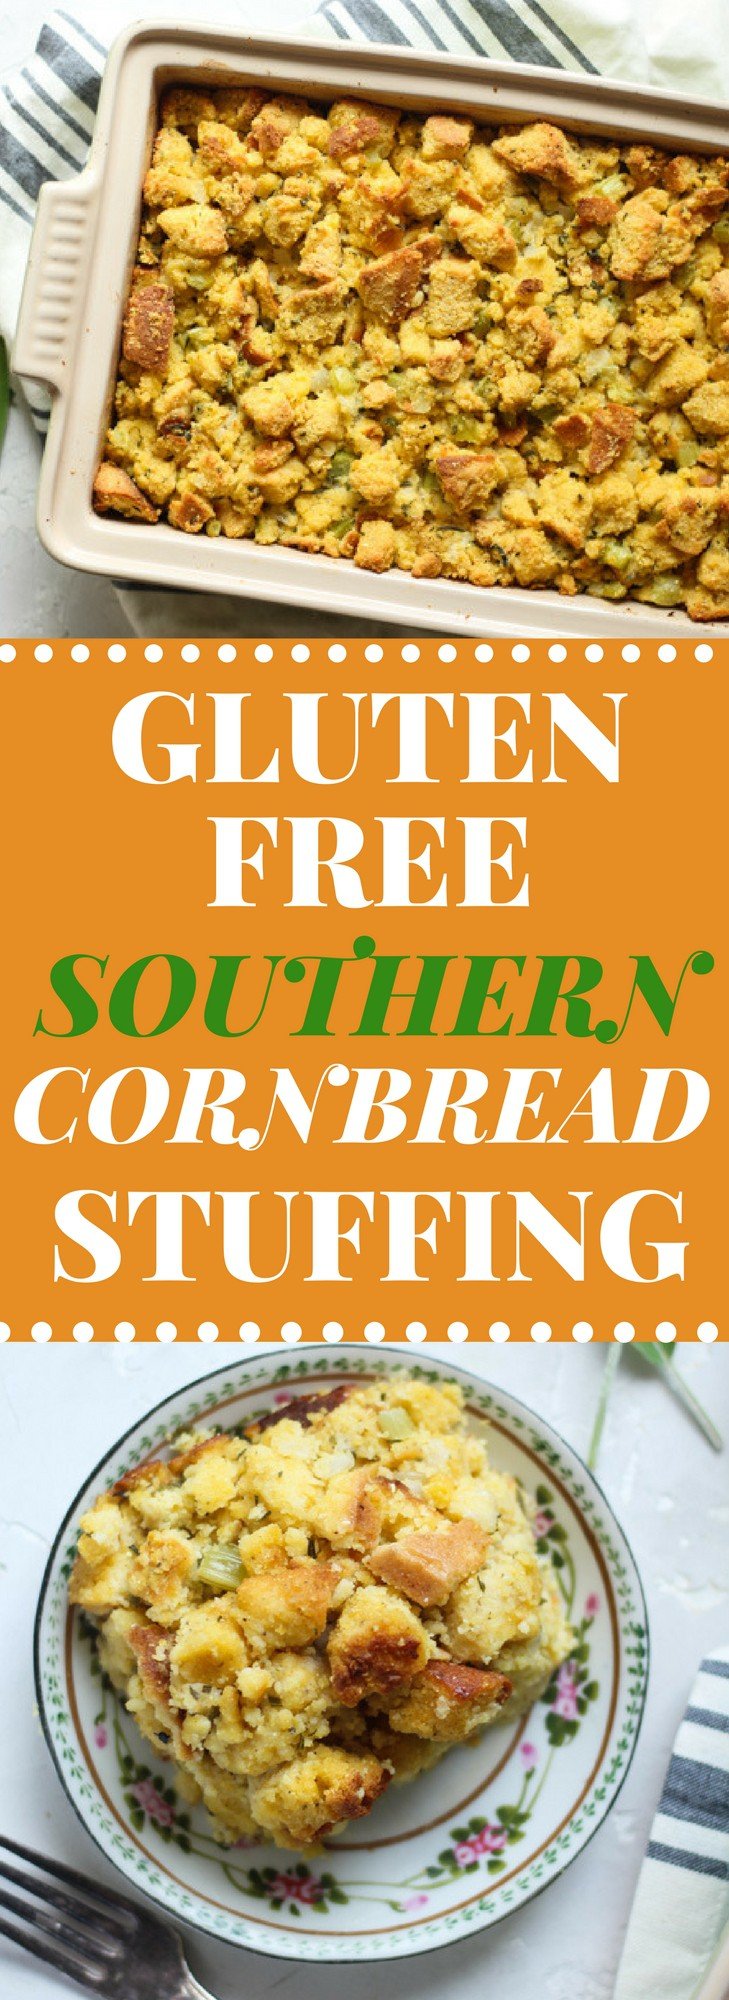 Gluten Free Sothern Cornbread stuffing with fresh rosemary, sage, and parsley